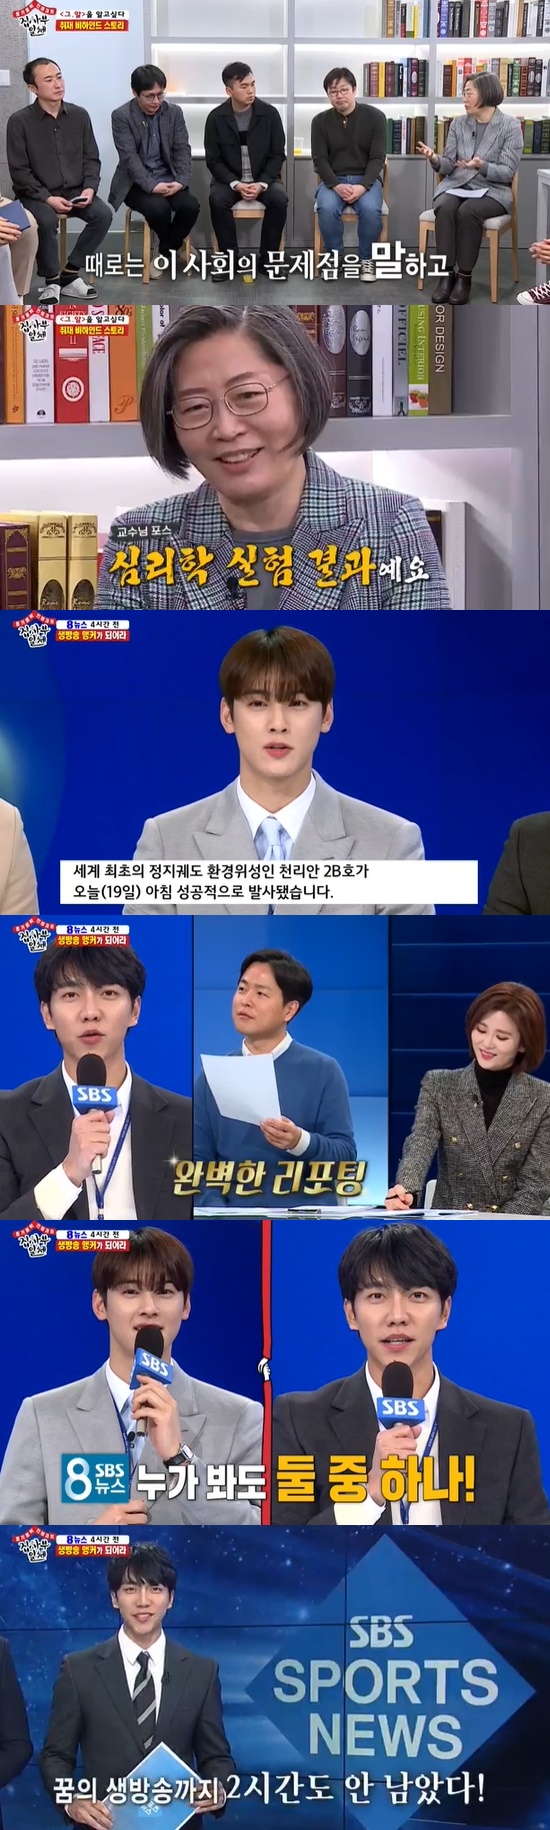 All The Butlers members struggled for SBS interviews such as It wants to know and 8 News.On SBS All The Butlers broadcast on the 19th, Cha Eun-woo and Kim Dong-Hyun appeared as The Inter daily.Lee Seung-gi, Yang Se-hyeong and Shin Sung-rok stood in front of the interview.Yang Se-hyeong said, I do not know what interview it is, but did not you become an honorary employee of SBS at the awards ceremony?But Yang Se-hyeong said, I tried to get into the pragmatic card, but I couldnt do it. It was just a paper when I pulled it out.Today is different, its a formal interview, the production team said.I introduced myself before the interviewer who entered the interview room. The interviewer was Cha Eun-woo.Cha Eun-woo, who wrote English language, Japanese, and Chinese, introduces himself to English language.When Yang Se-hyeong asked, Whats your downside? Cha Eun-woo said, I want to be fun like my brother.Cha Eun-woo also added that he was third in the school and also the student chairman.The company where the members will be interviewed for The International was SBS, which included participation in the production of It I Want to Know (after Gal), live appearances of 8 News, and final interviews with the head of the entertainment department.Kim Dong-Hyun appeared on The Internet, and a special gift was released.First, the members visited the Gal team. Lee Seung-gi found a picture of Lee Young-jin, a lover and actor of Bae Jung-hoon, at Bae Jung-hoon PD desk.The members shared roles such as crushing work, organizing the Ry house, and preparing for Professor Lee Soo-jungs interview.Cha Eun-woo told Bae Jung-hoon, I had a first question: Dont you sneak the camera when you cover the scary people?Have you ever been caught? Bae Jung-hoon PD said, Everyone will have such experience, but they hide the original memory of the shooting in their underwear.Lee Seung-gi recommended Kim Dong-Hyun, while Kim Dong-Hyun said, The strong detective was a dream.I can catch it all, but I gave up because the written test was so difficult. Lee Seung-gi asked after the interview with Professor Lee Soo-jung, I always consulted you, how long has it been?Lee Soo-jung said, I think Gal is about 30 years old, but I have been about 20 years.When Shin Sung-rok asked, Is not it a long time to prepare when you are consulting? Lee Soo-jung said, Ry comes for advice.They do not cover the means and methods, but they will find and send them to the case several decades ago. Ry is my position to give.When the production team said, We are giving Ry to the show, Lee said, I recently started to get what you have to say exactly. I did not receive it for about 10 years.Finally, Lee Soo-jung said, I am always exposed to the threat of the production team, me, and my personal life. The important thing is that I keep talking.I throw a sense of problem and reveal the truth of the case. The members then followed Jo Jeong-sik announcer to the press headquarters; Jo Jeong-sik introduced the Hyun Woo Anchor and Choi Hye-rim Anchor.Hyun Woo is a real model of Cho Jeong-seok in the drama The Incarnation of Jealousy and married Lee Ji-jin, a weather caster like a drama.Senior announcers said one of the members would appear on Sports News, and the members began an analizing test to select a representative.After the test of Cha Eun-woo, senior announcers high-fived: Its a bit of a low-pitched voice, a radio-like feeling, said Hyun Woo.Lee Seung-gi also finished the test with a stable tone, and Choi Hye-rim and Hyun Woo were praised as the most news tone; it is very stable.Jo Jeong-sik also said, Its the first time, but I do very well.The next Anchor quality test was to memorize and report articles; Lee Seung-gi was perfectly memorizing and eye-catching; the first was Lee Seung-gi.Cha Eun-woo was then picked as the back-up anchor by radio news relay, Yang Se-hyeong; Lee Seung-gi was given the Sports News Closing comment.Photo = SBS Broadcasting Screen